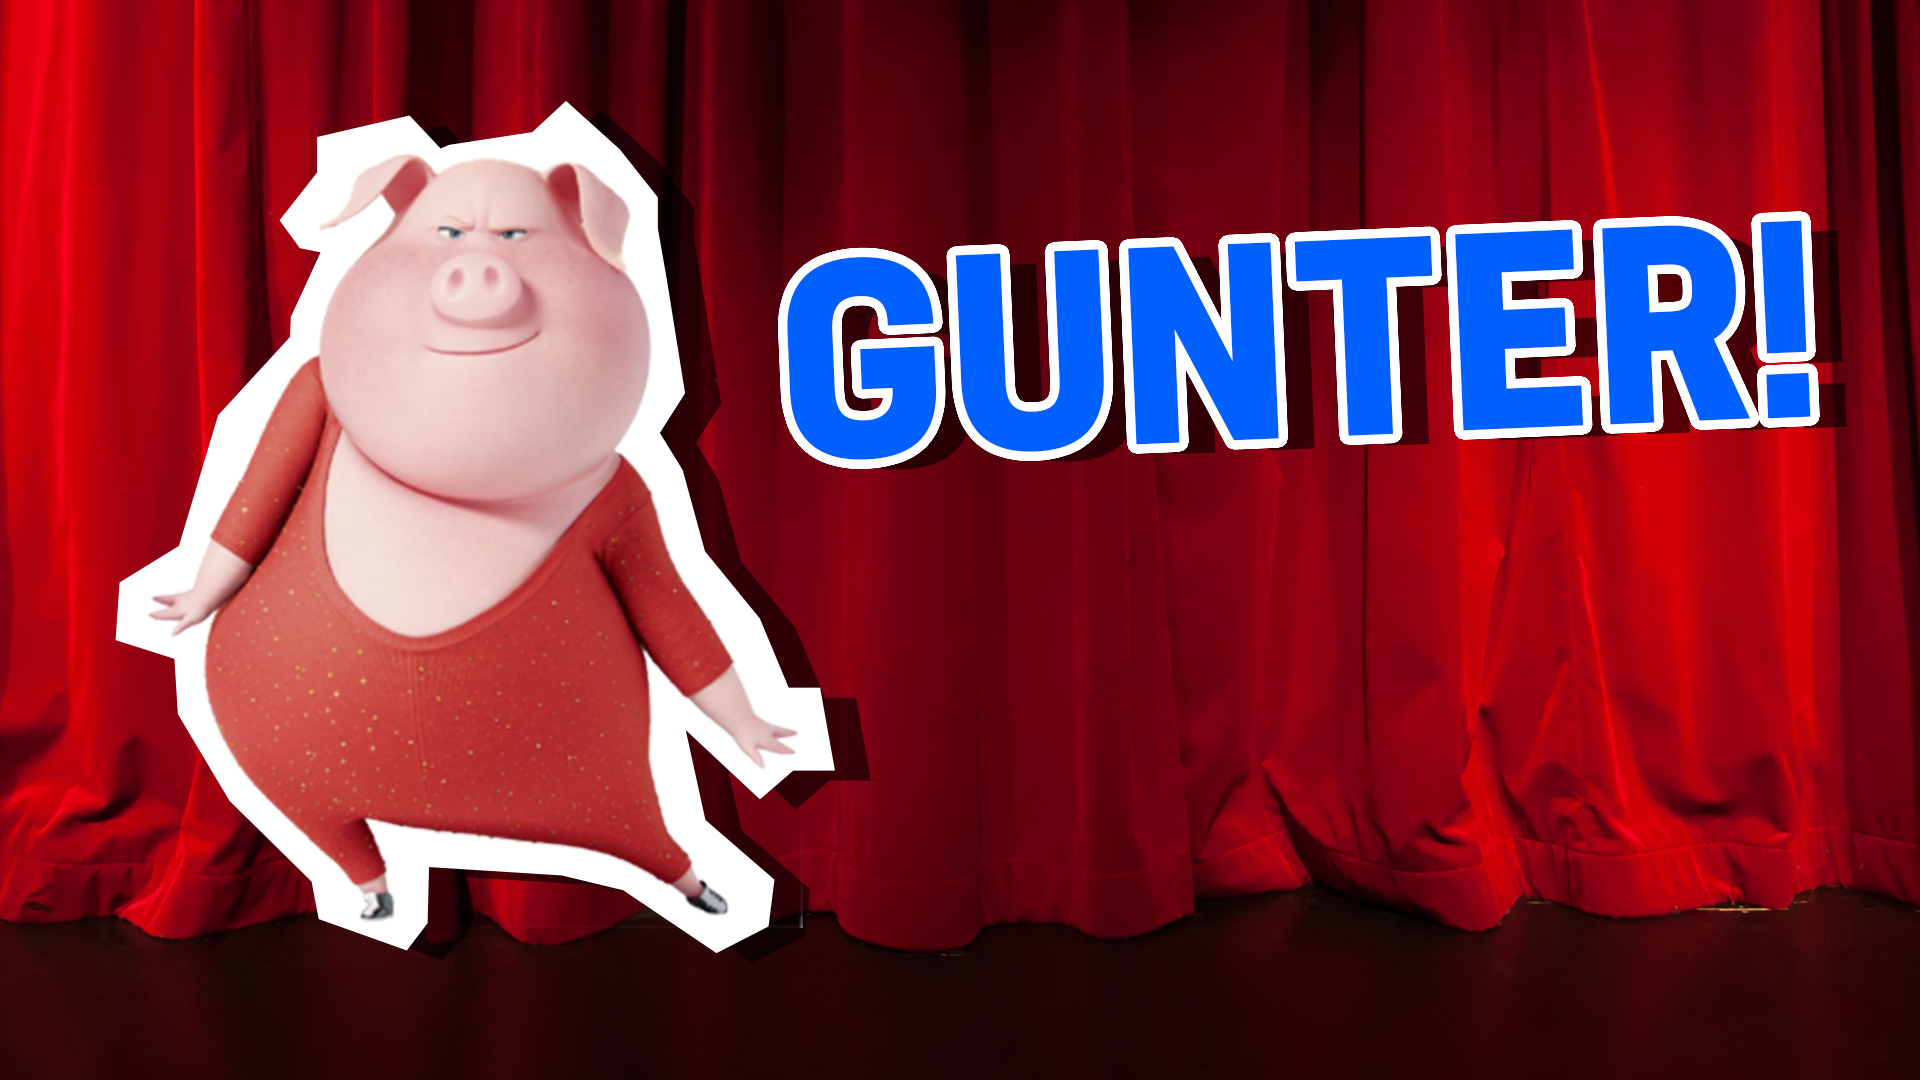 Gunter from Sing! What Sing Character Are You? | Sing Quiz